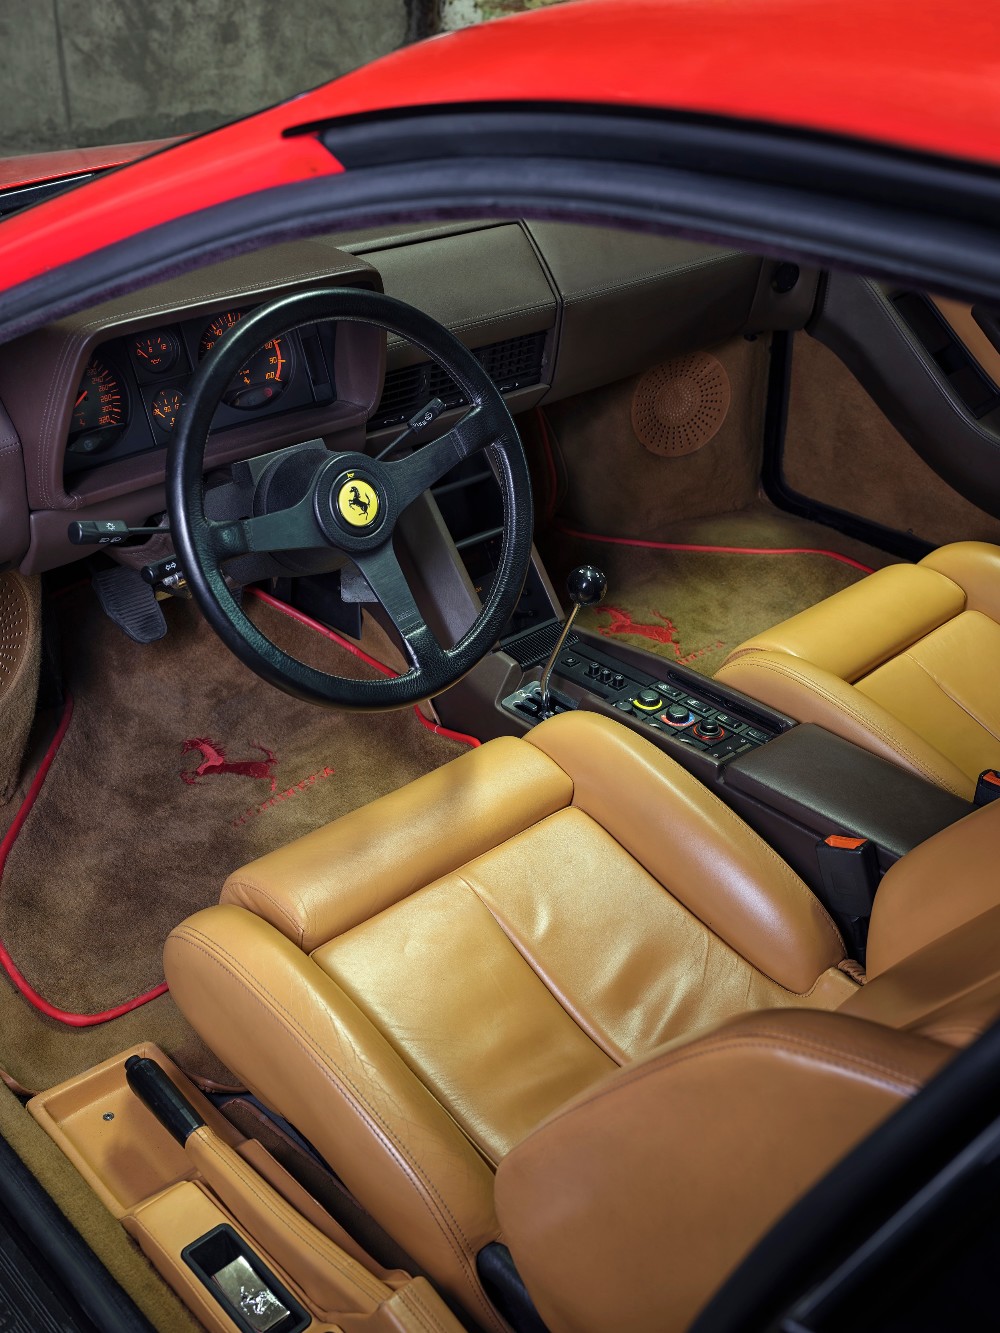 1991 FERRARI TESTAROSSA Registration Number: UK Taxes Paid     Chassis Number: ZFFSM17A6M0088562 - Image 19 of 24